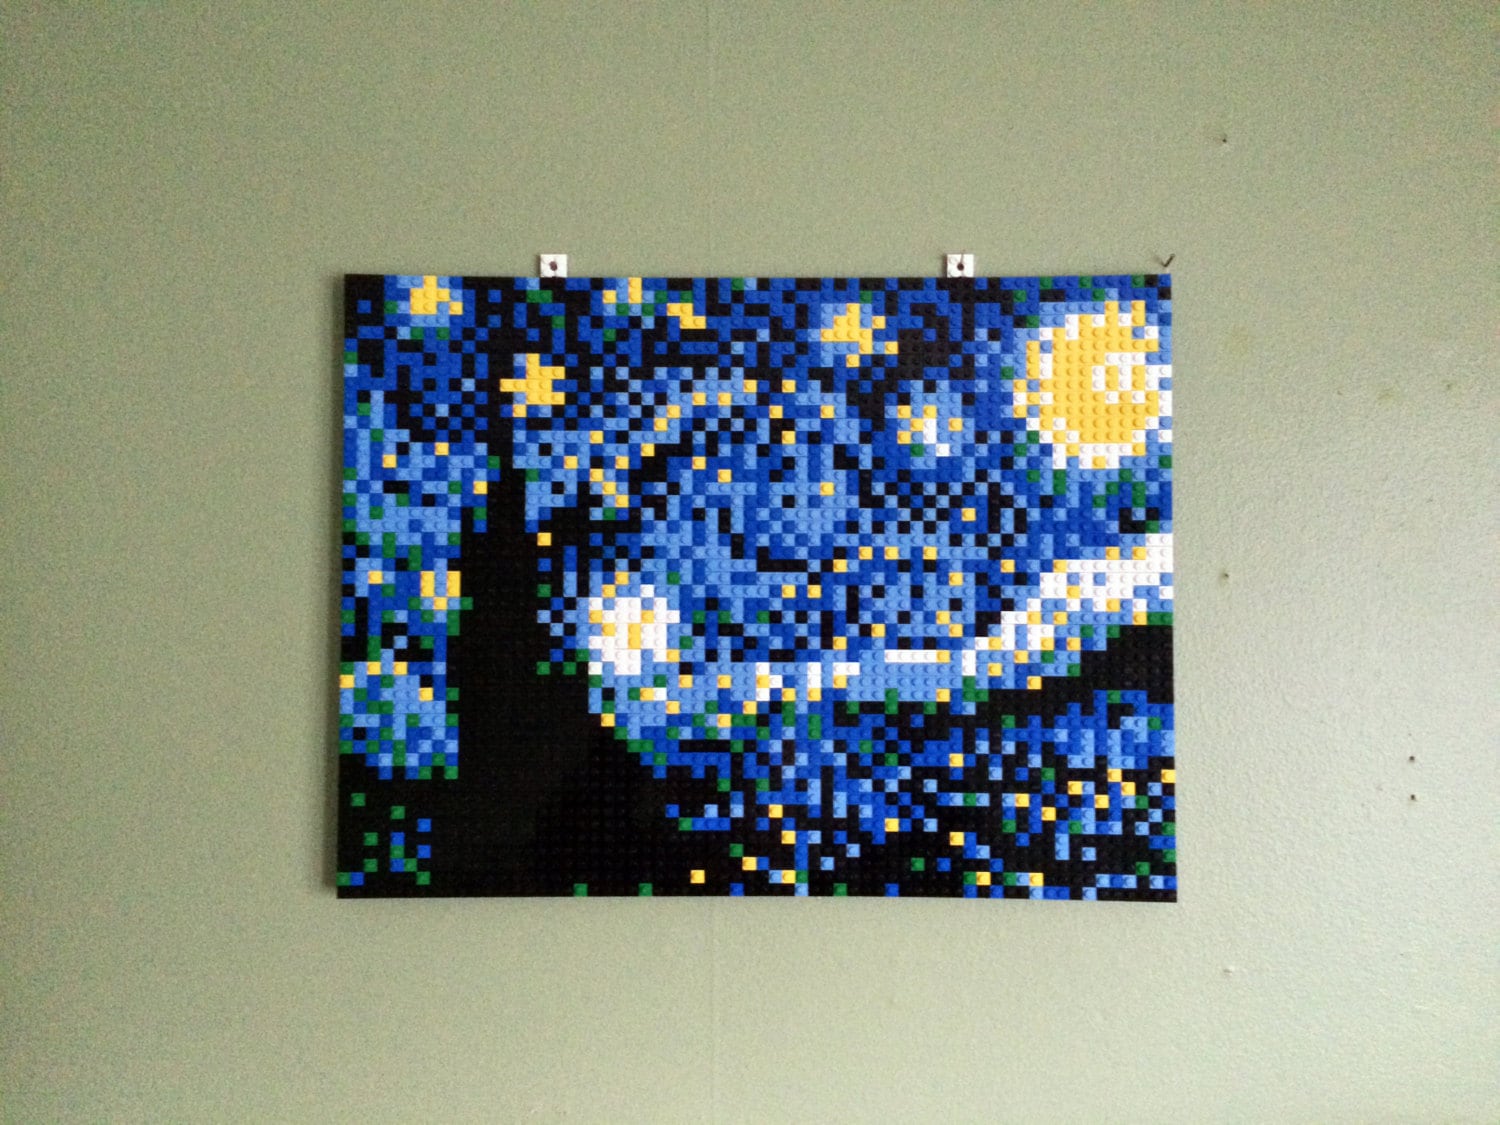 LEGO Van Gogh, Weekend before last, I got to spend a couple…